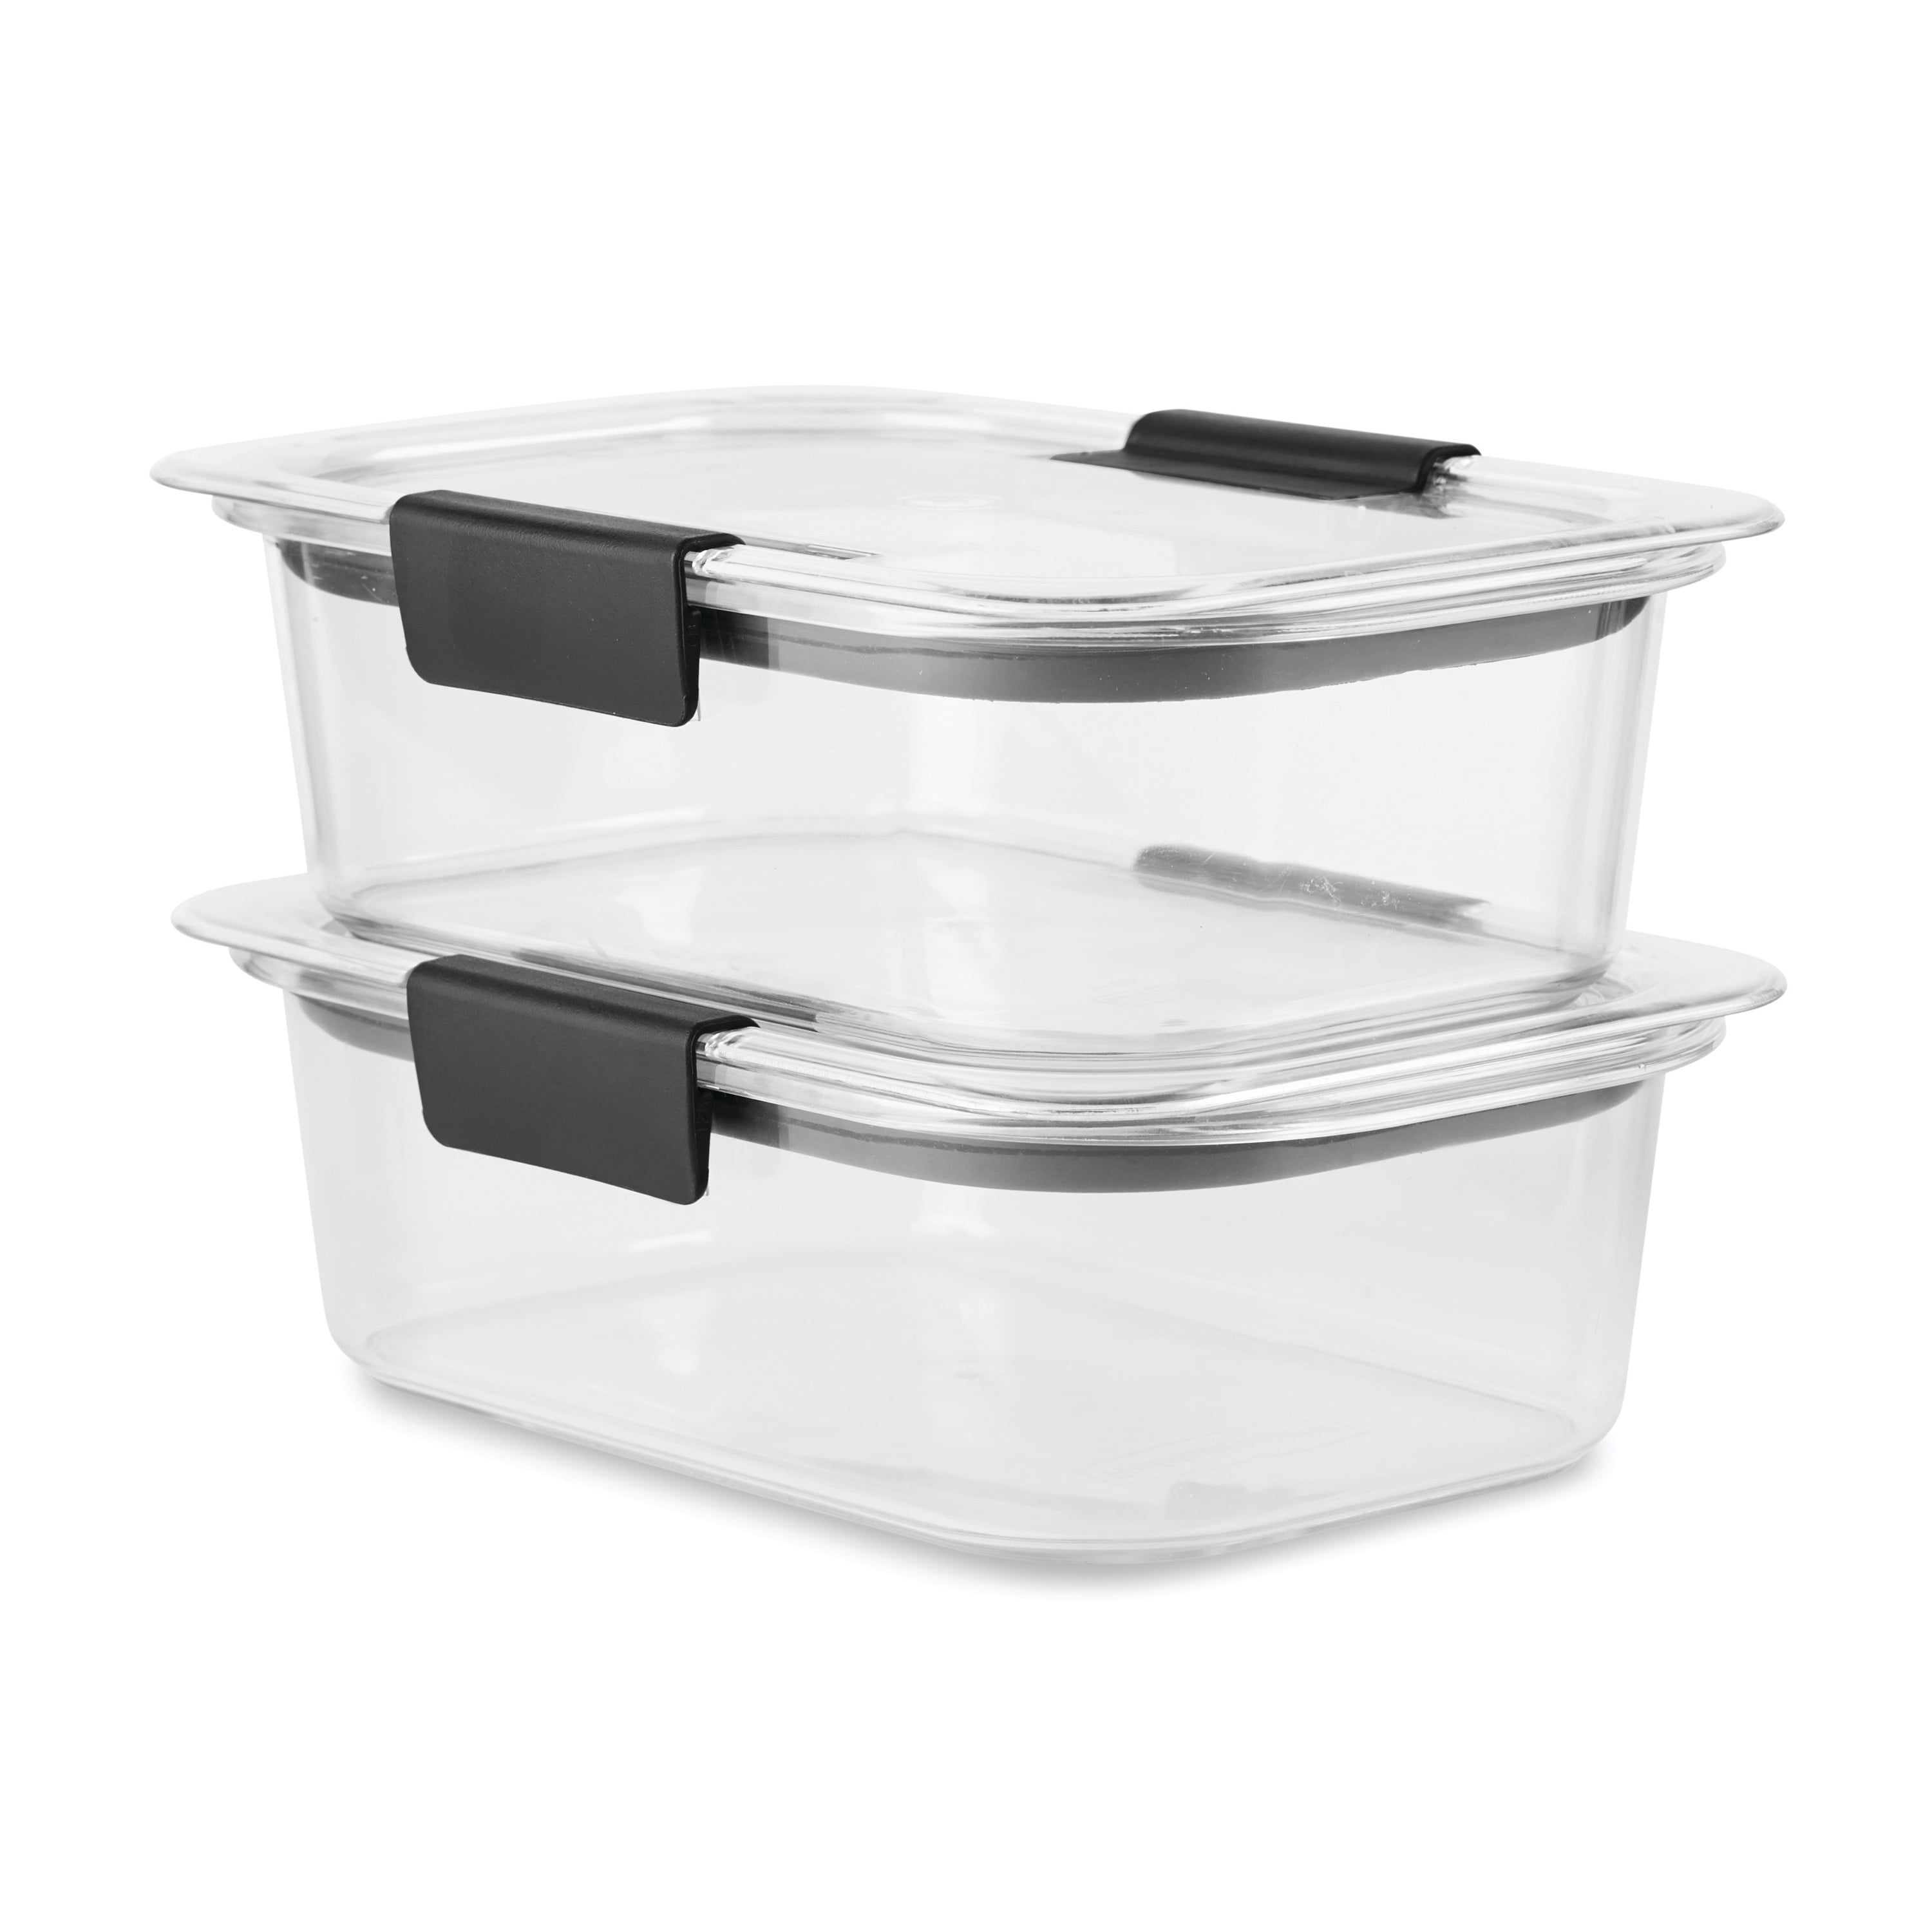 Rubbermaid Brilliance Glass Set of 3 Food Storage Containers with Latching Lids, Leakproof